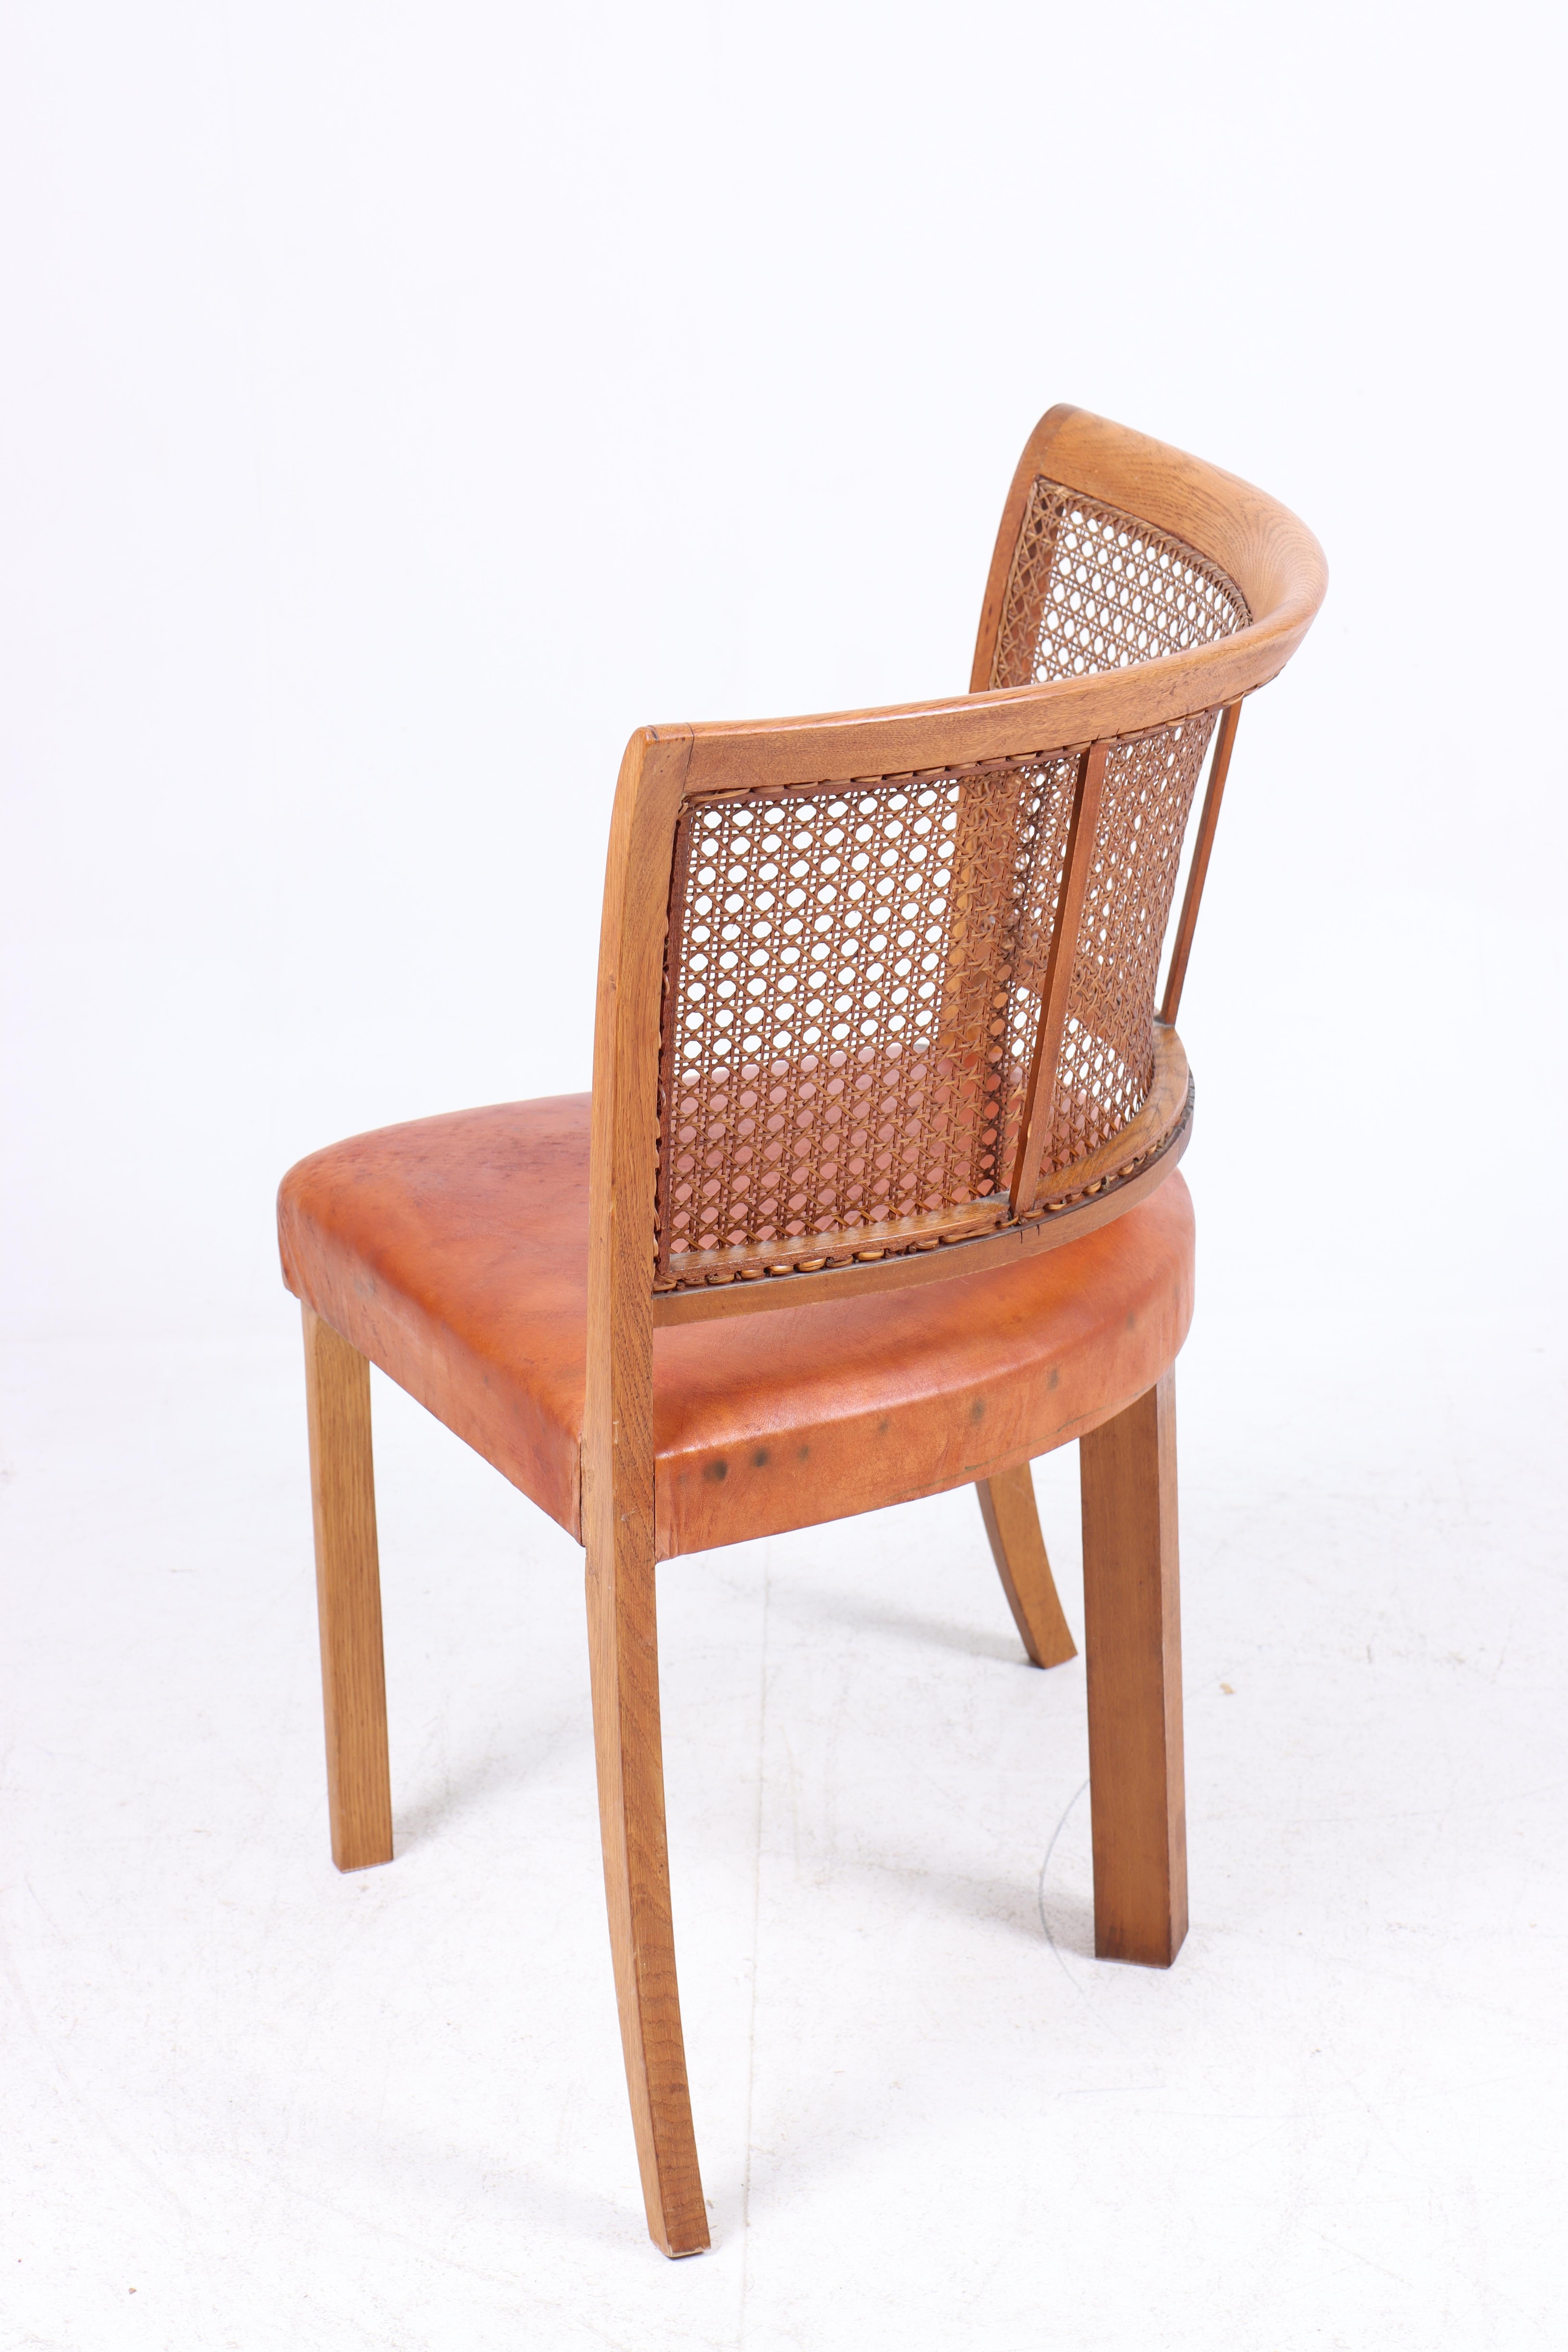 Danish Side Chair in Oak and Cognac Leather, 1940s In Good Condition For Sale In Lejre, DK